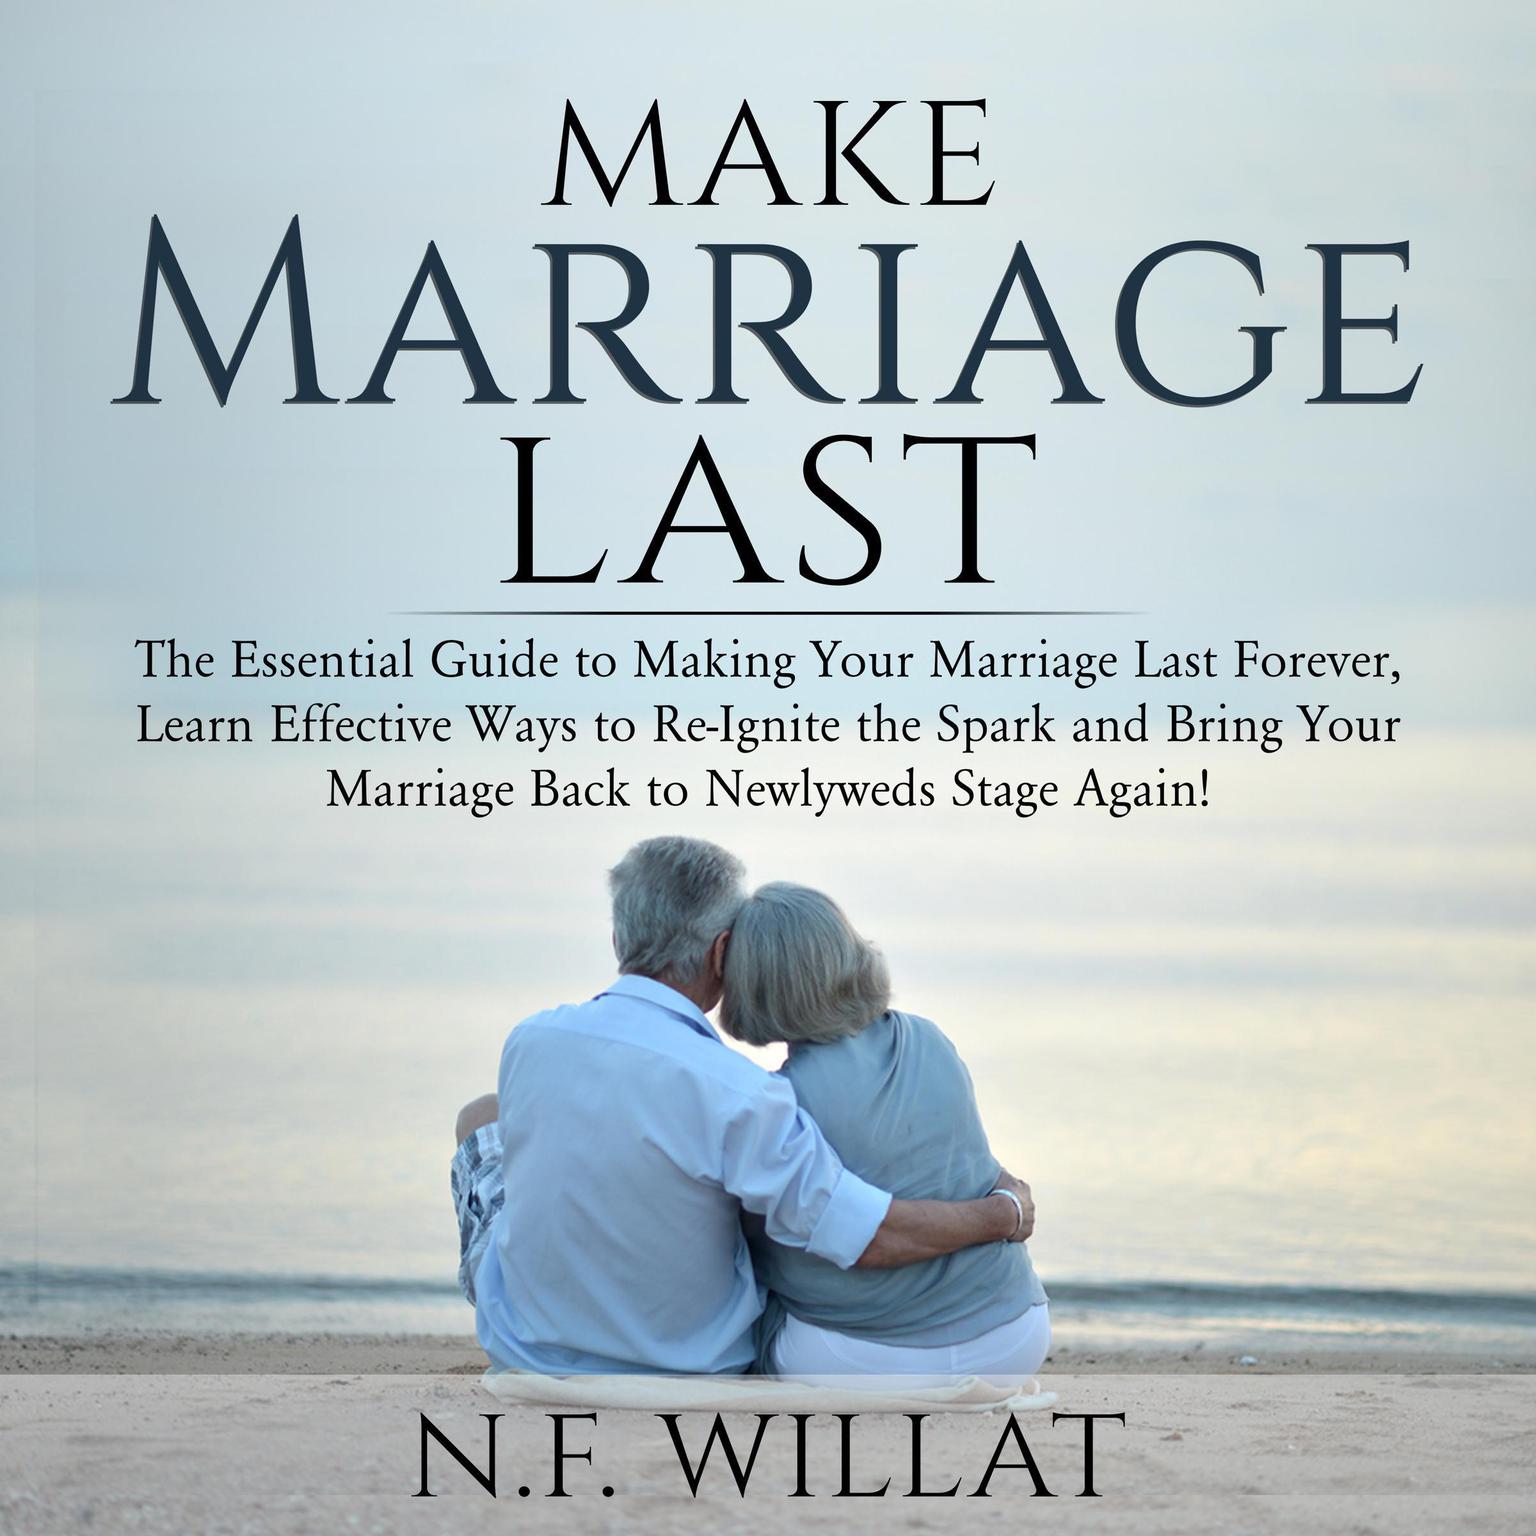 Make Marriage Last : The Essential Guide to Making Your Marriage Last Forever, Learn Effective Ways to Re-Ignite the Spark, and Bring Your Marriage Back to Newlyweds Stage Again Audiobook, by N.F. Willat